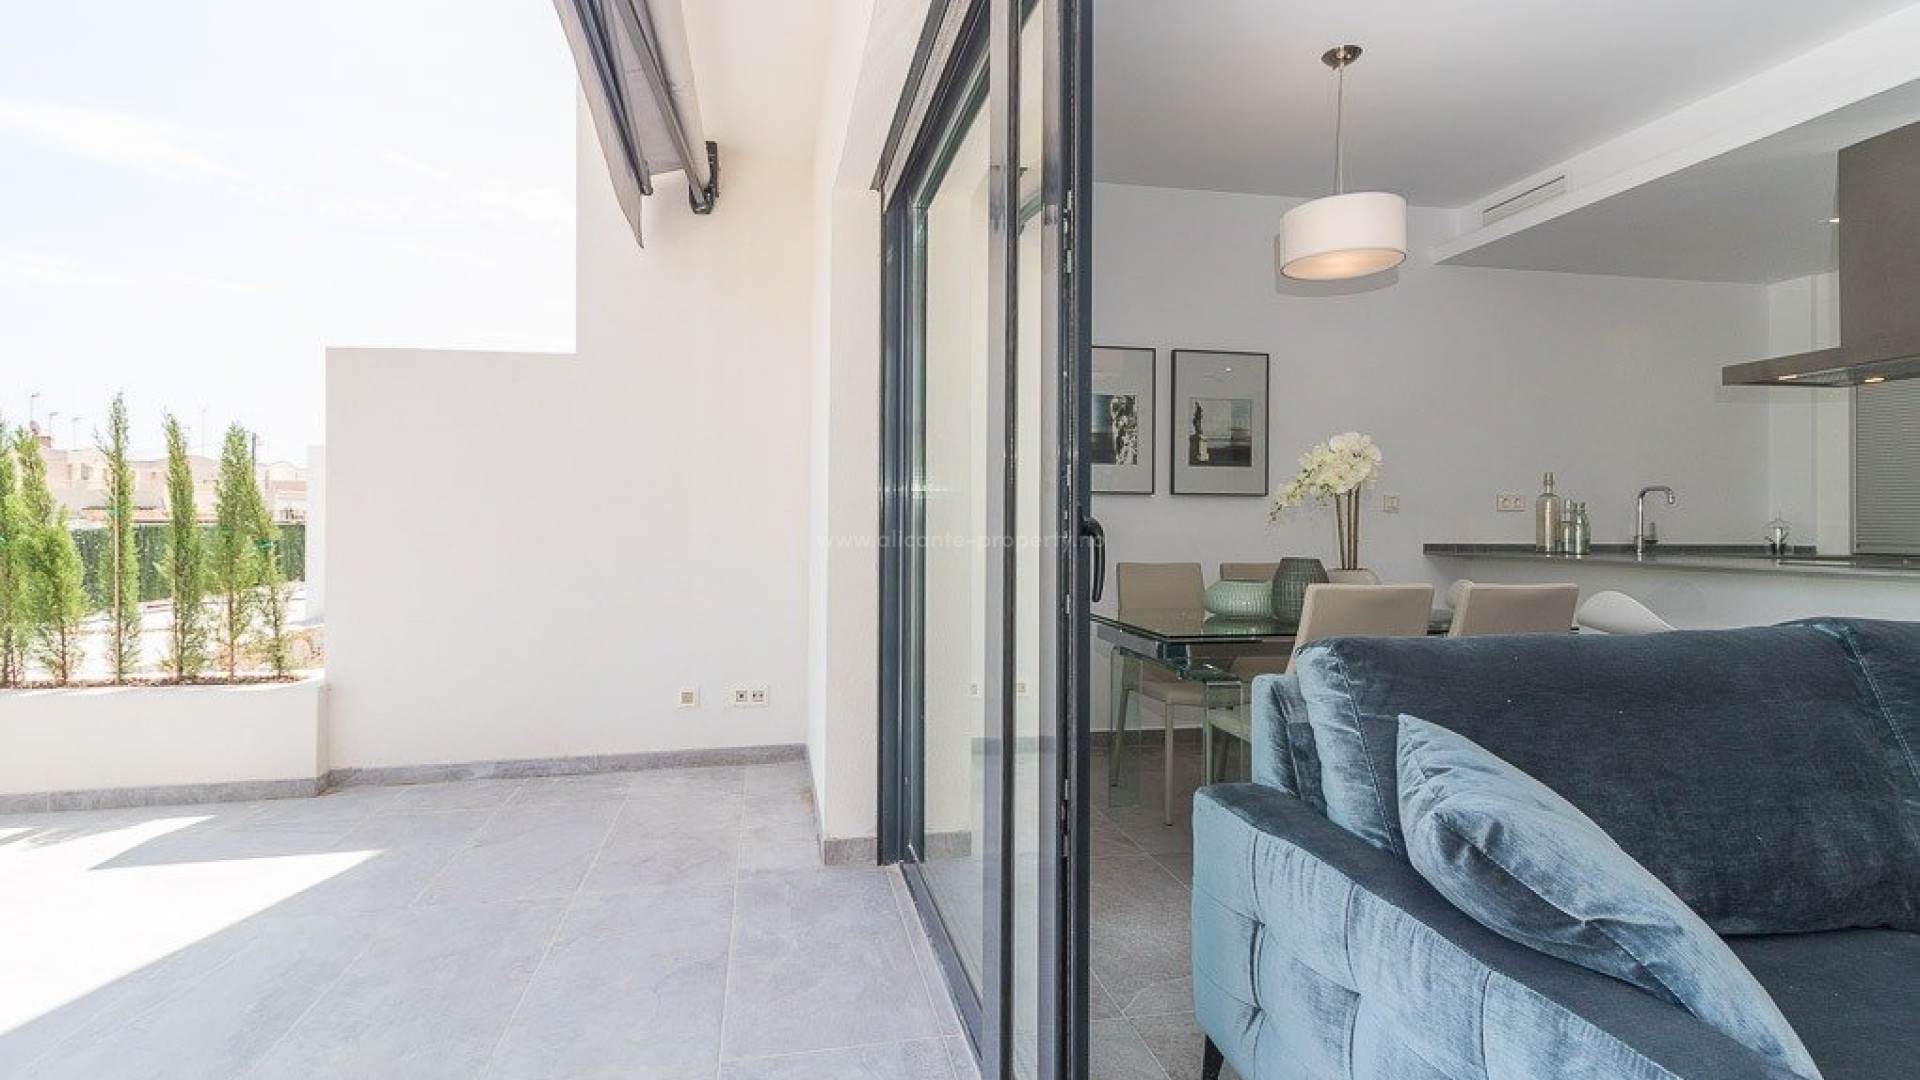 Exclusive residential complex with bungalows at Los Balcones (Torrevieja) with nice views Close to the famous beaches of Torrevieja and Orihuela Costa